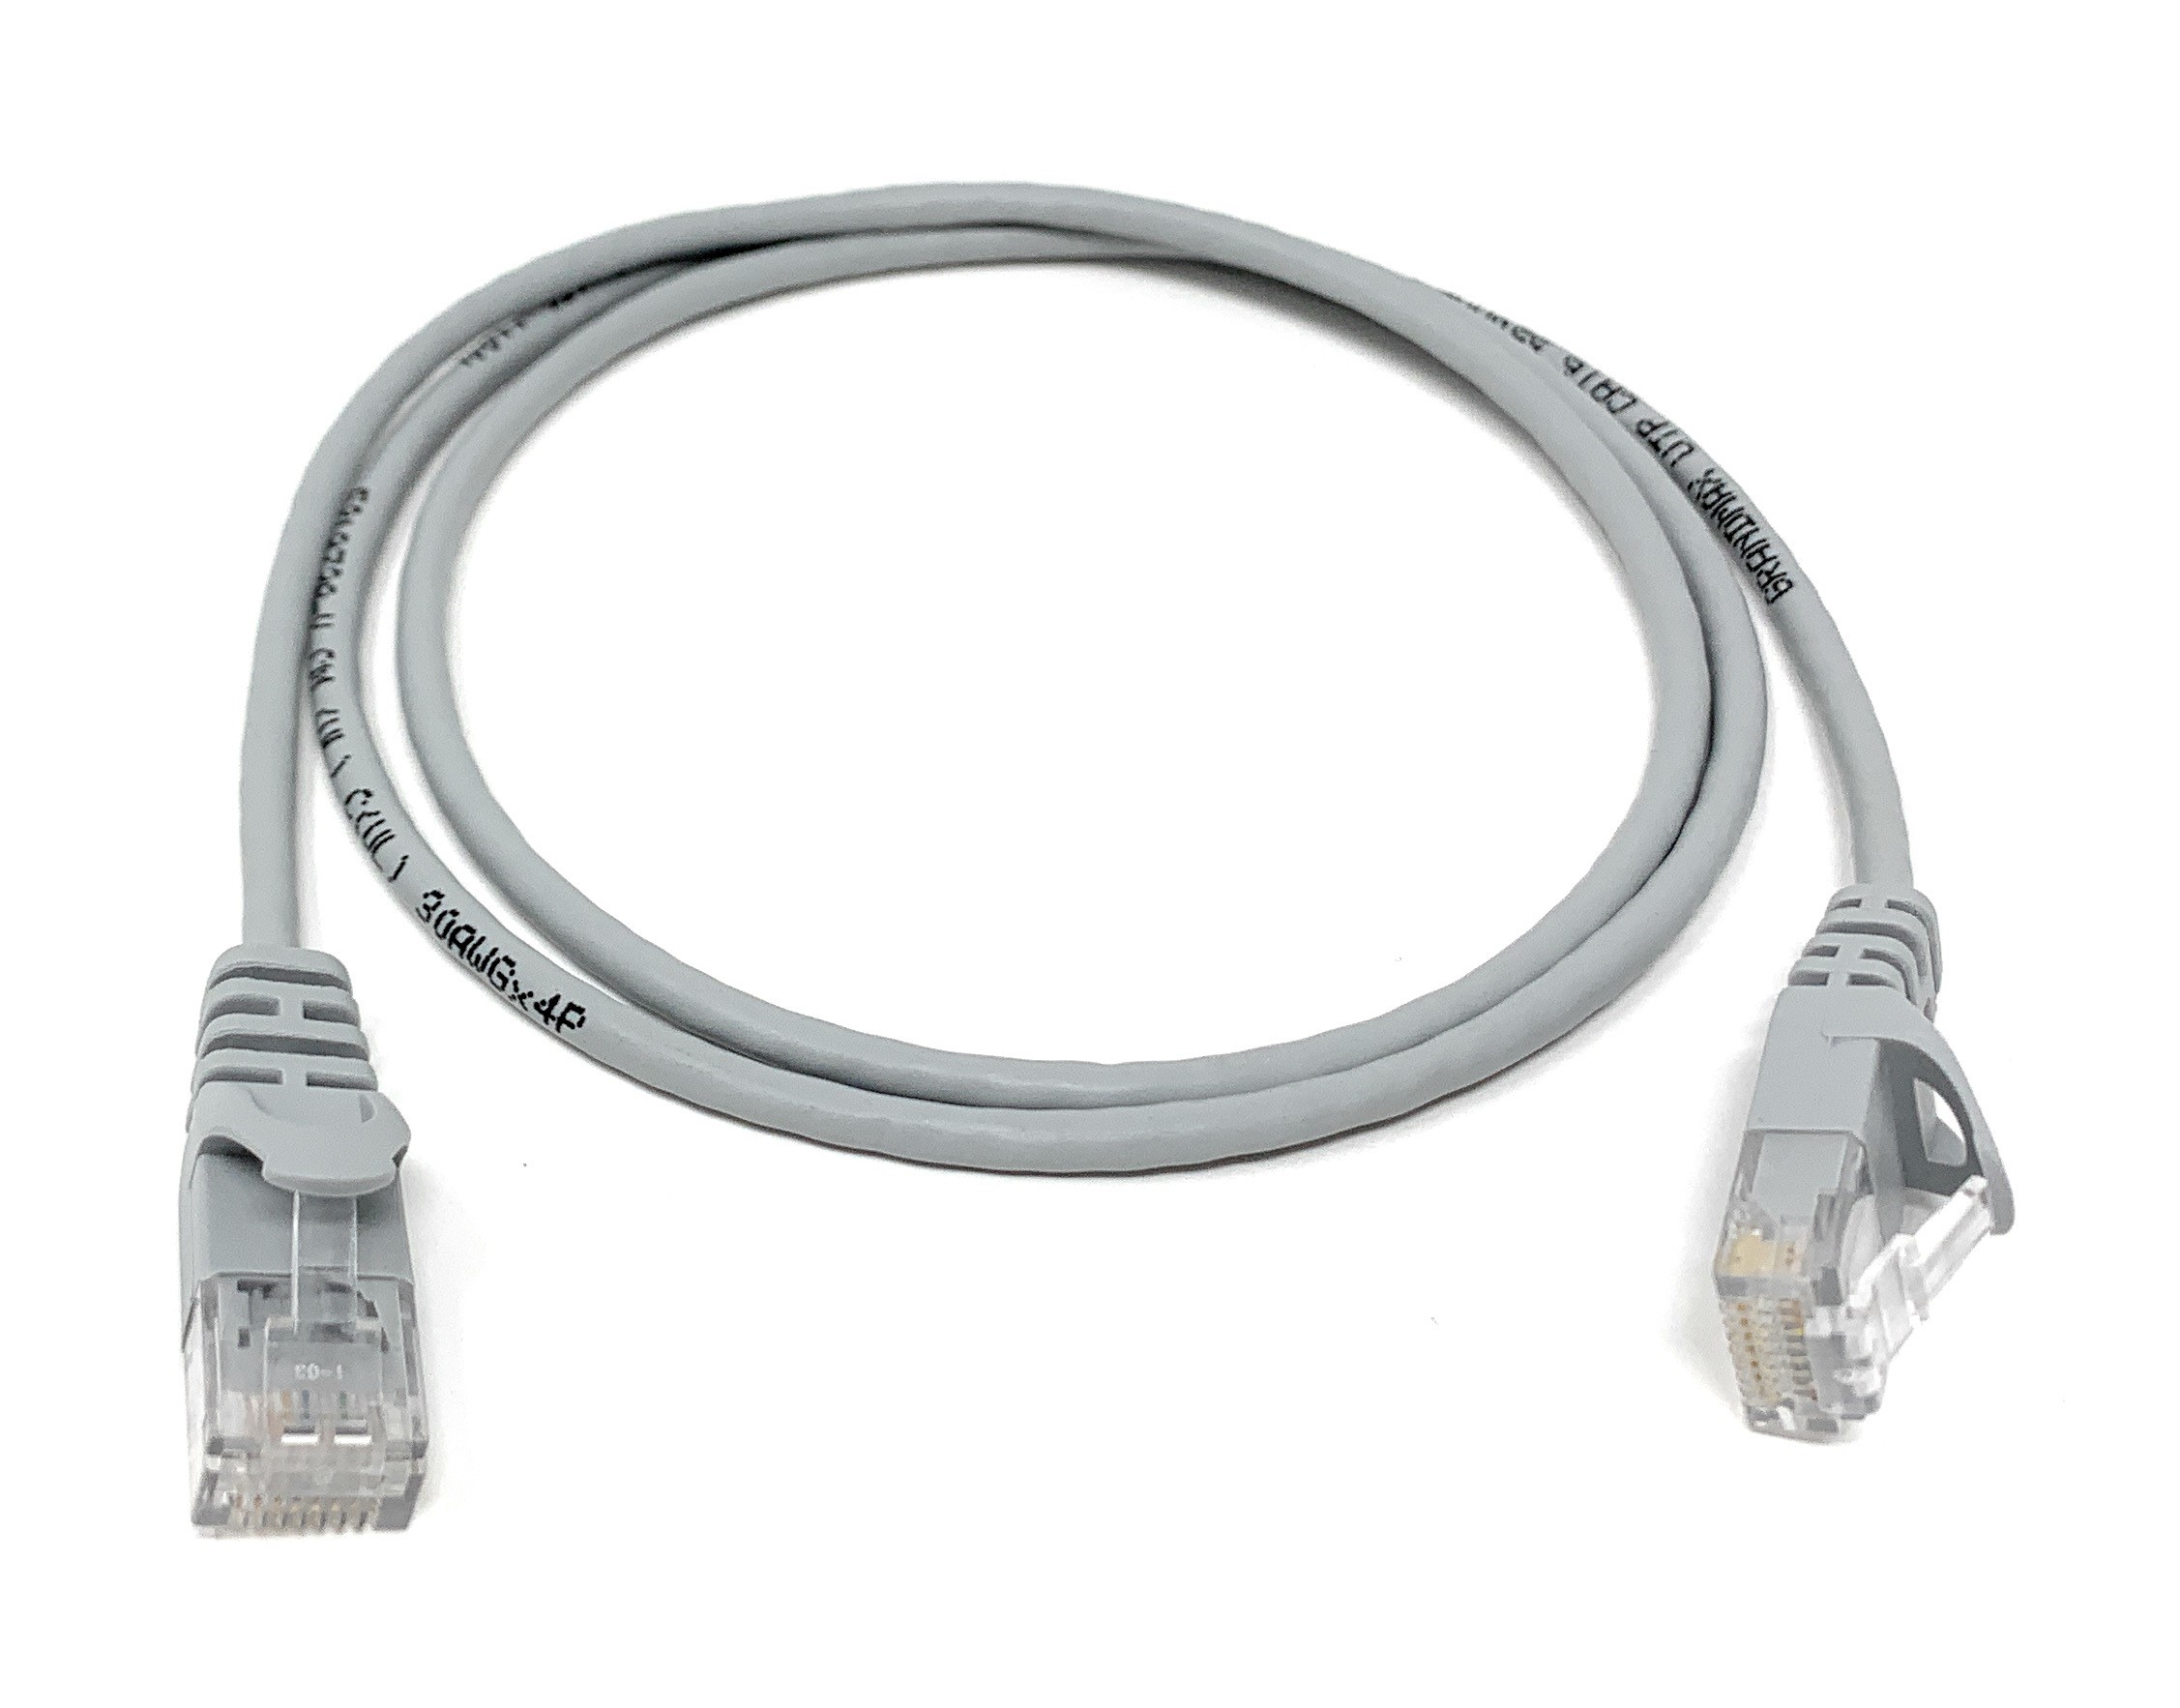 White 35' Cat 5 Ethernet Patch Cable RJ45 